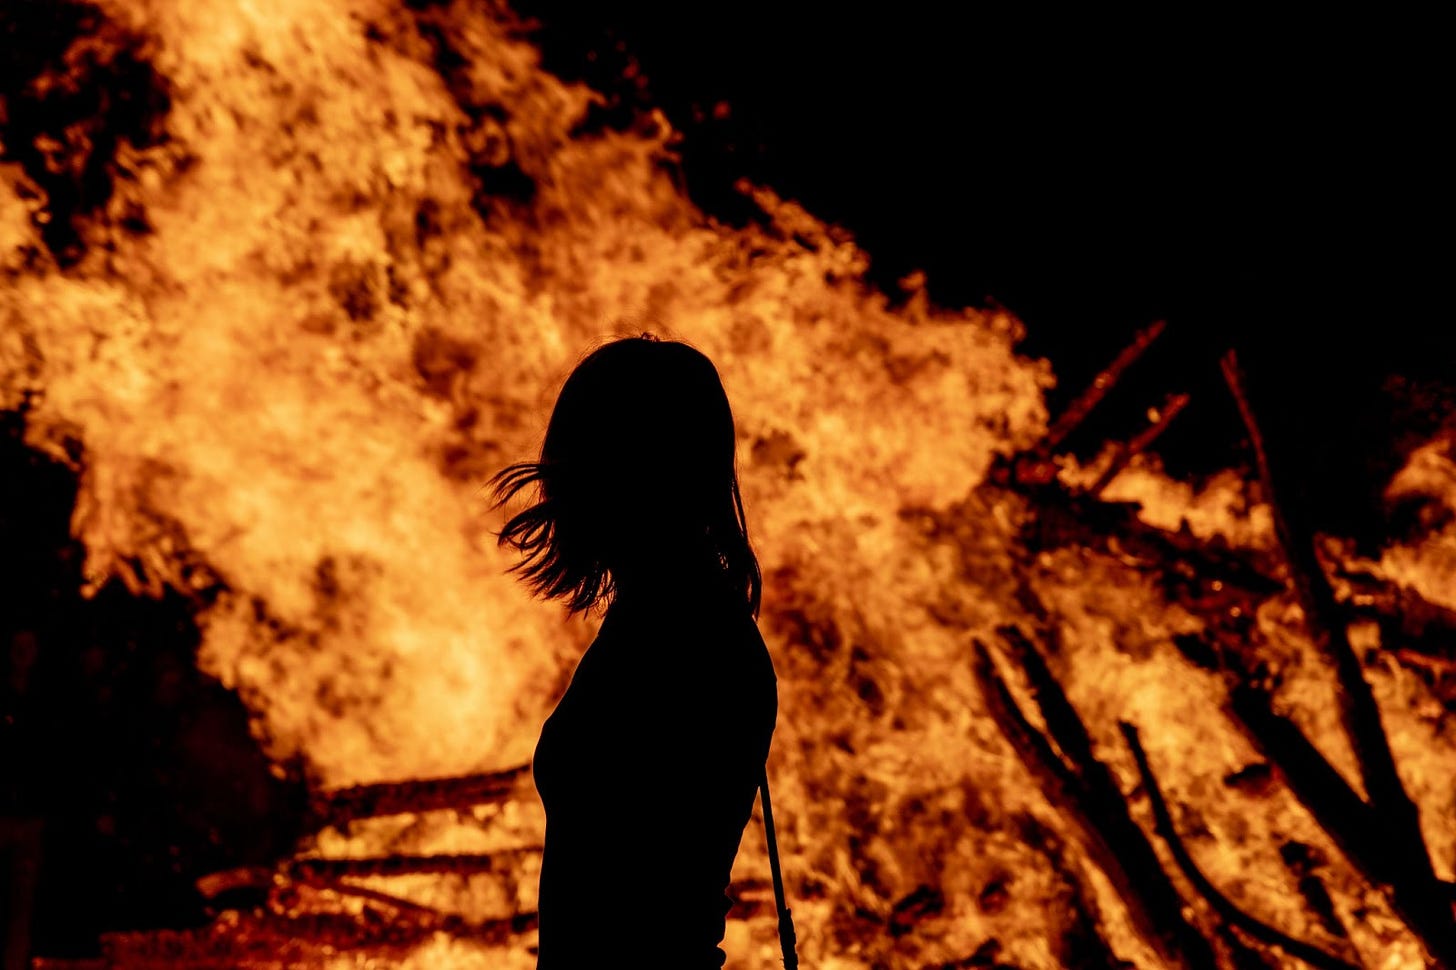 Image of fire burning with long-haired person profiled from behind, seeing just their outline